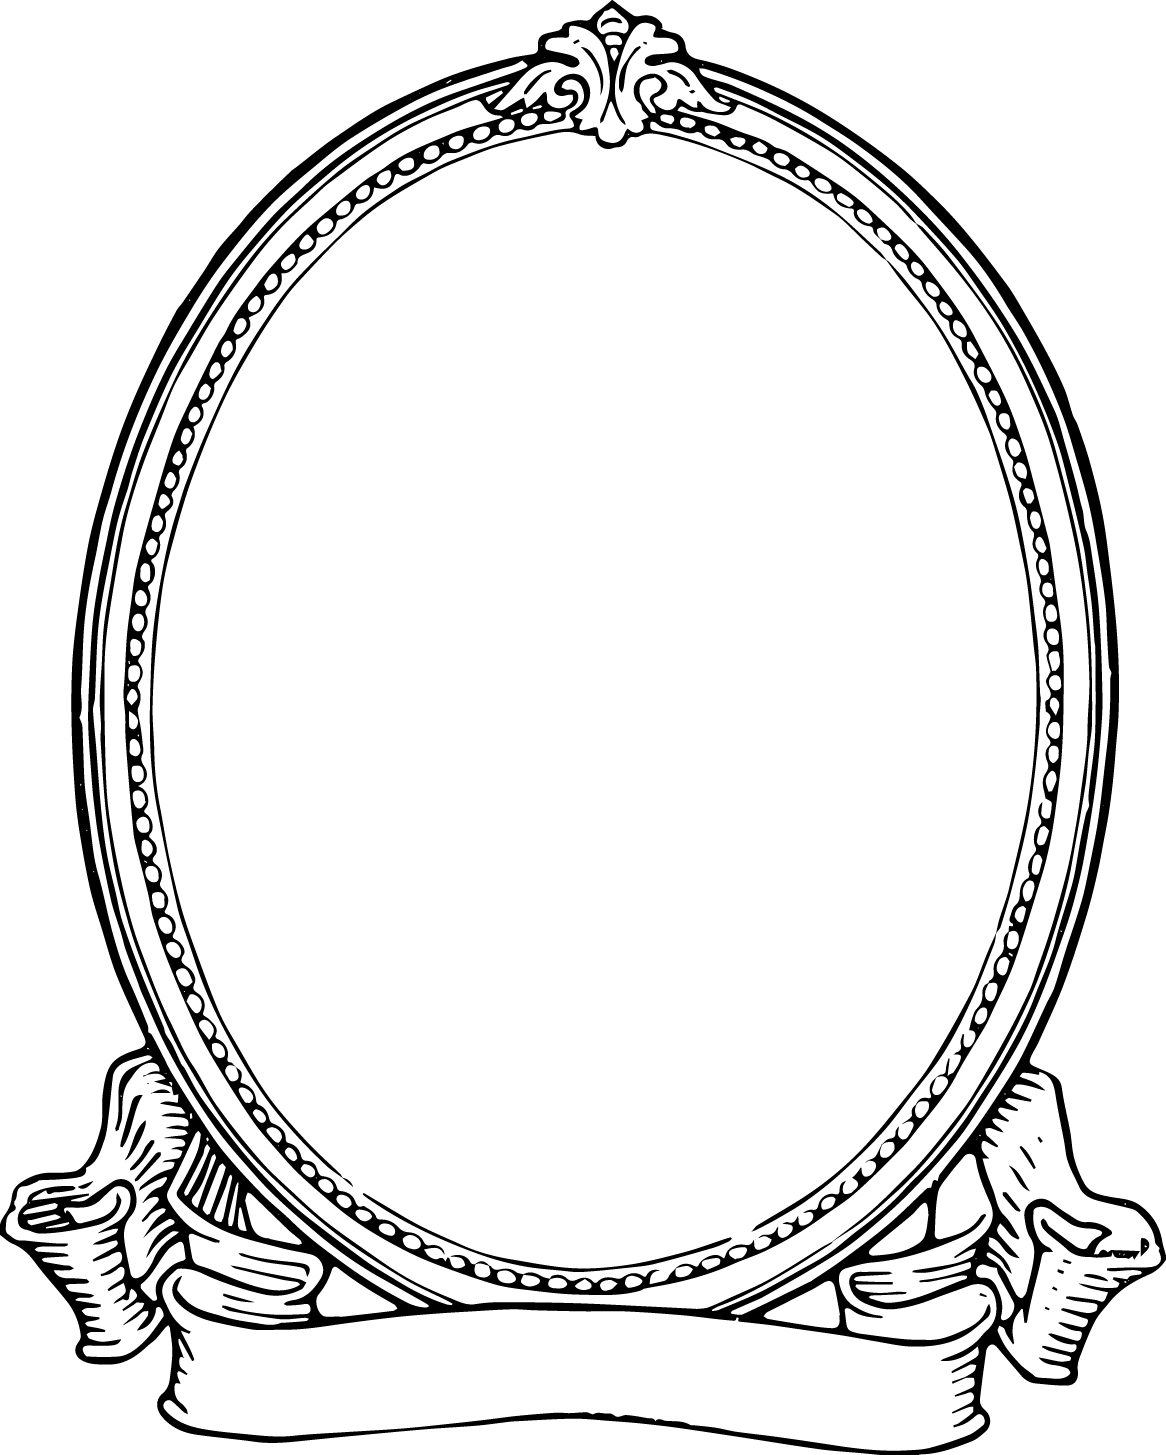 Frame Clip Art Black And White   Clipart Panda   Free Clipart Images